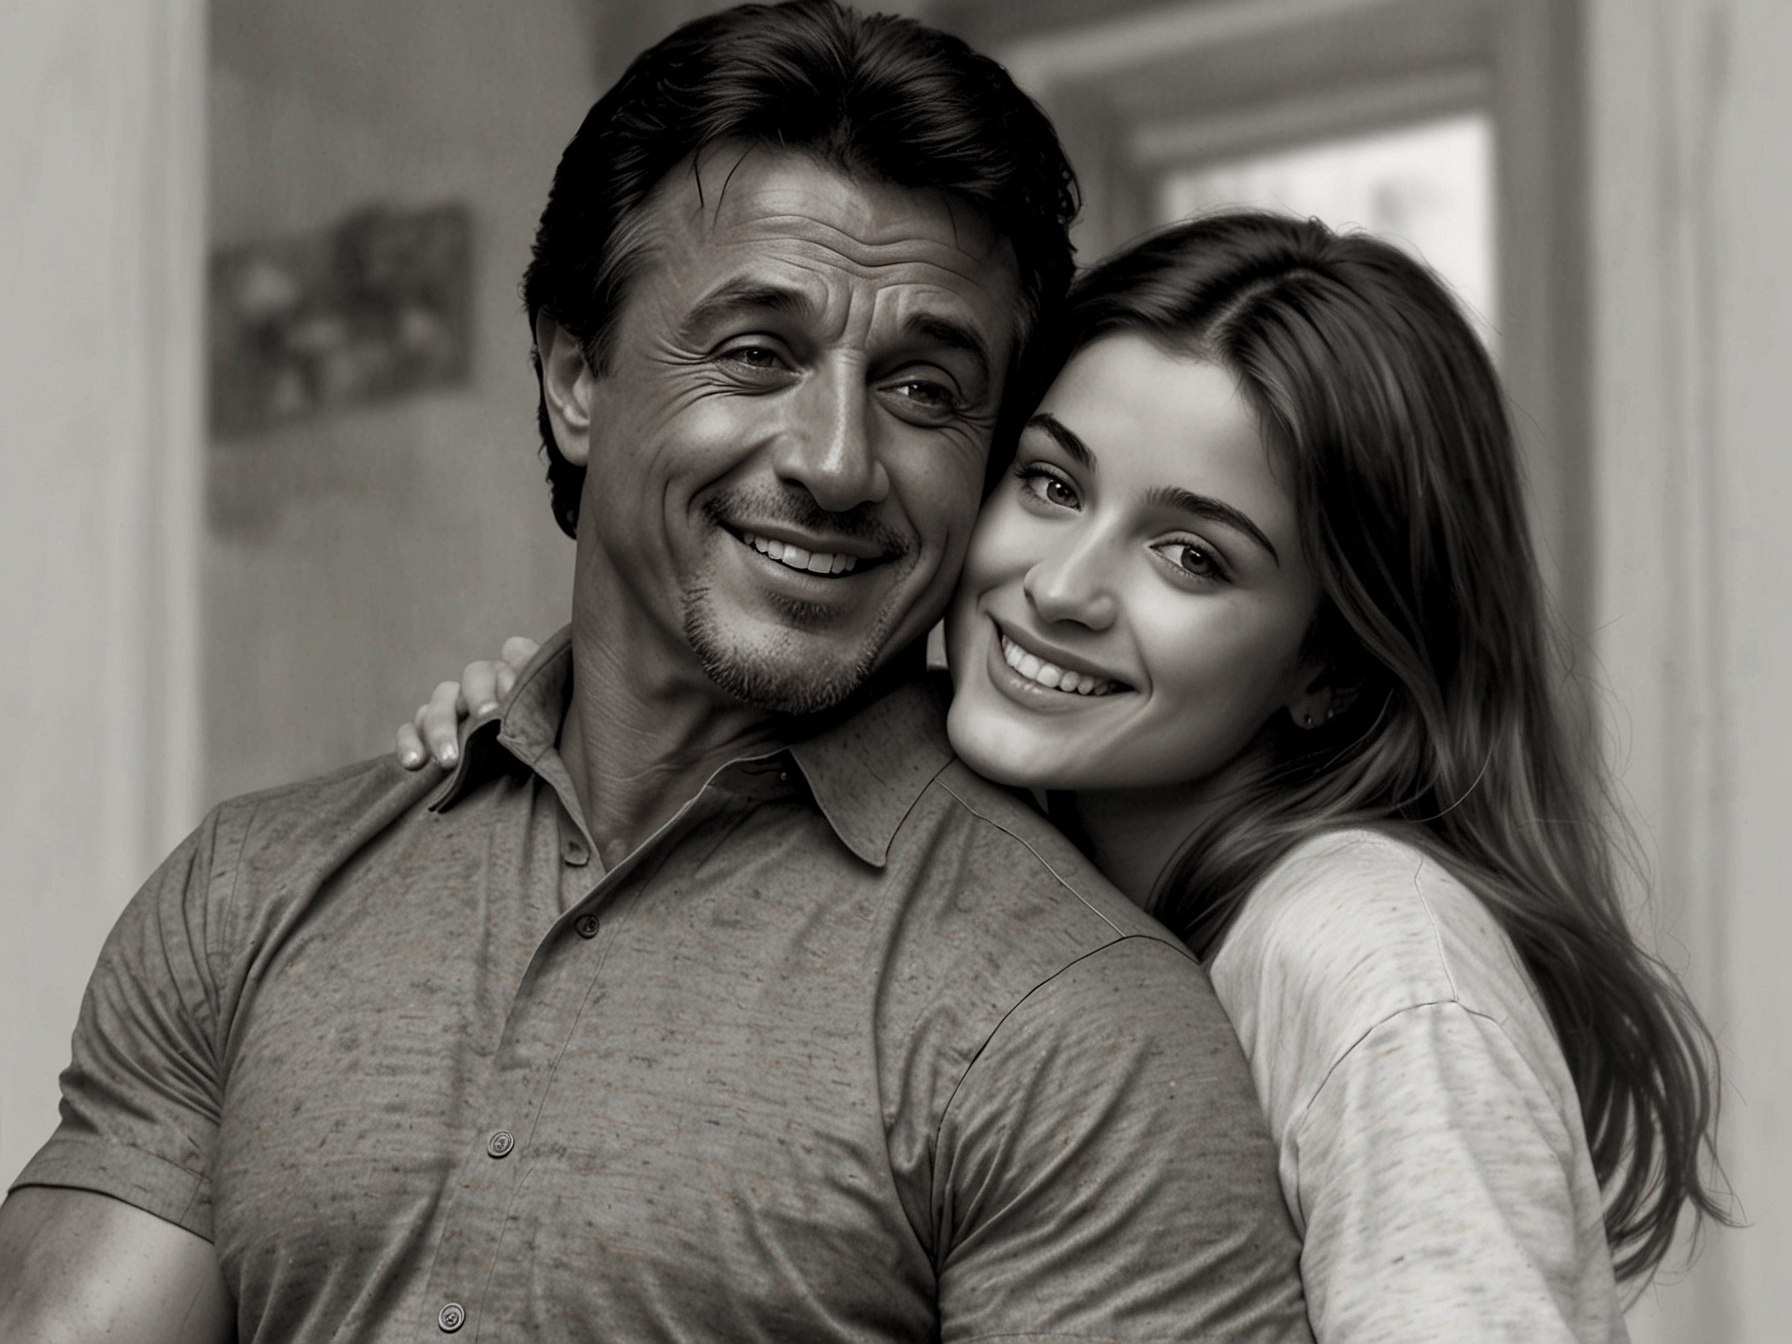 Sylvester Stallone, smiling warmly, embraces his daughter Sistine in a candid family photo, highlighting their close bond and the joy they share.